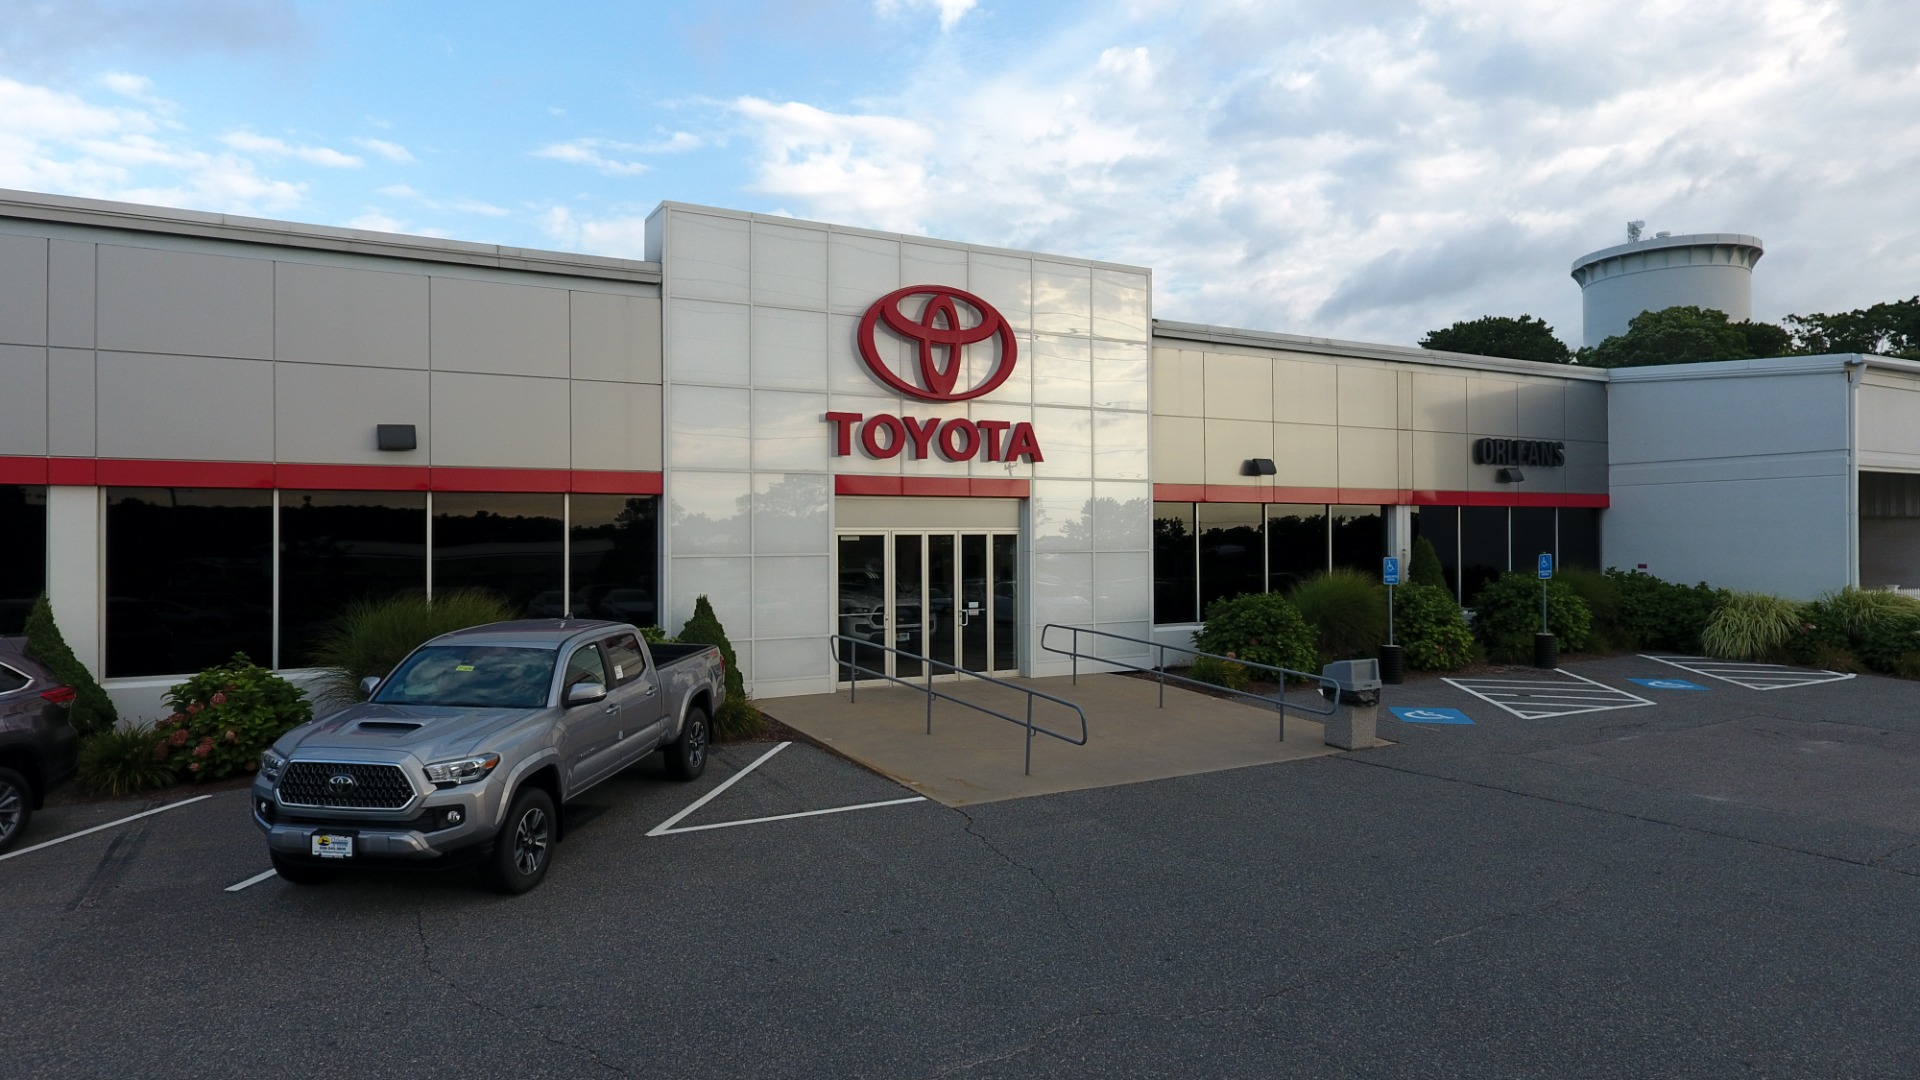 Ira Toyota of Orleans